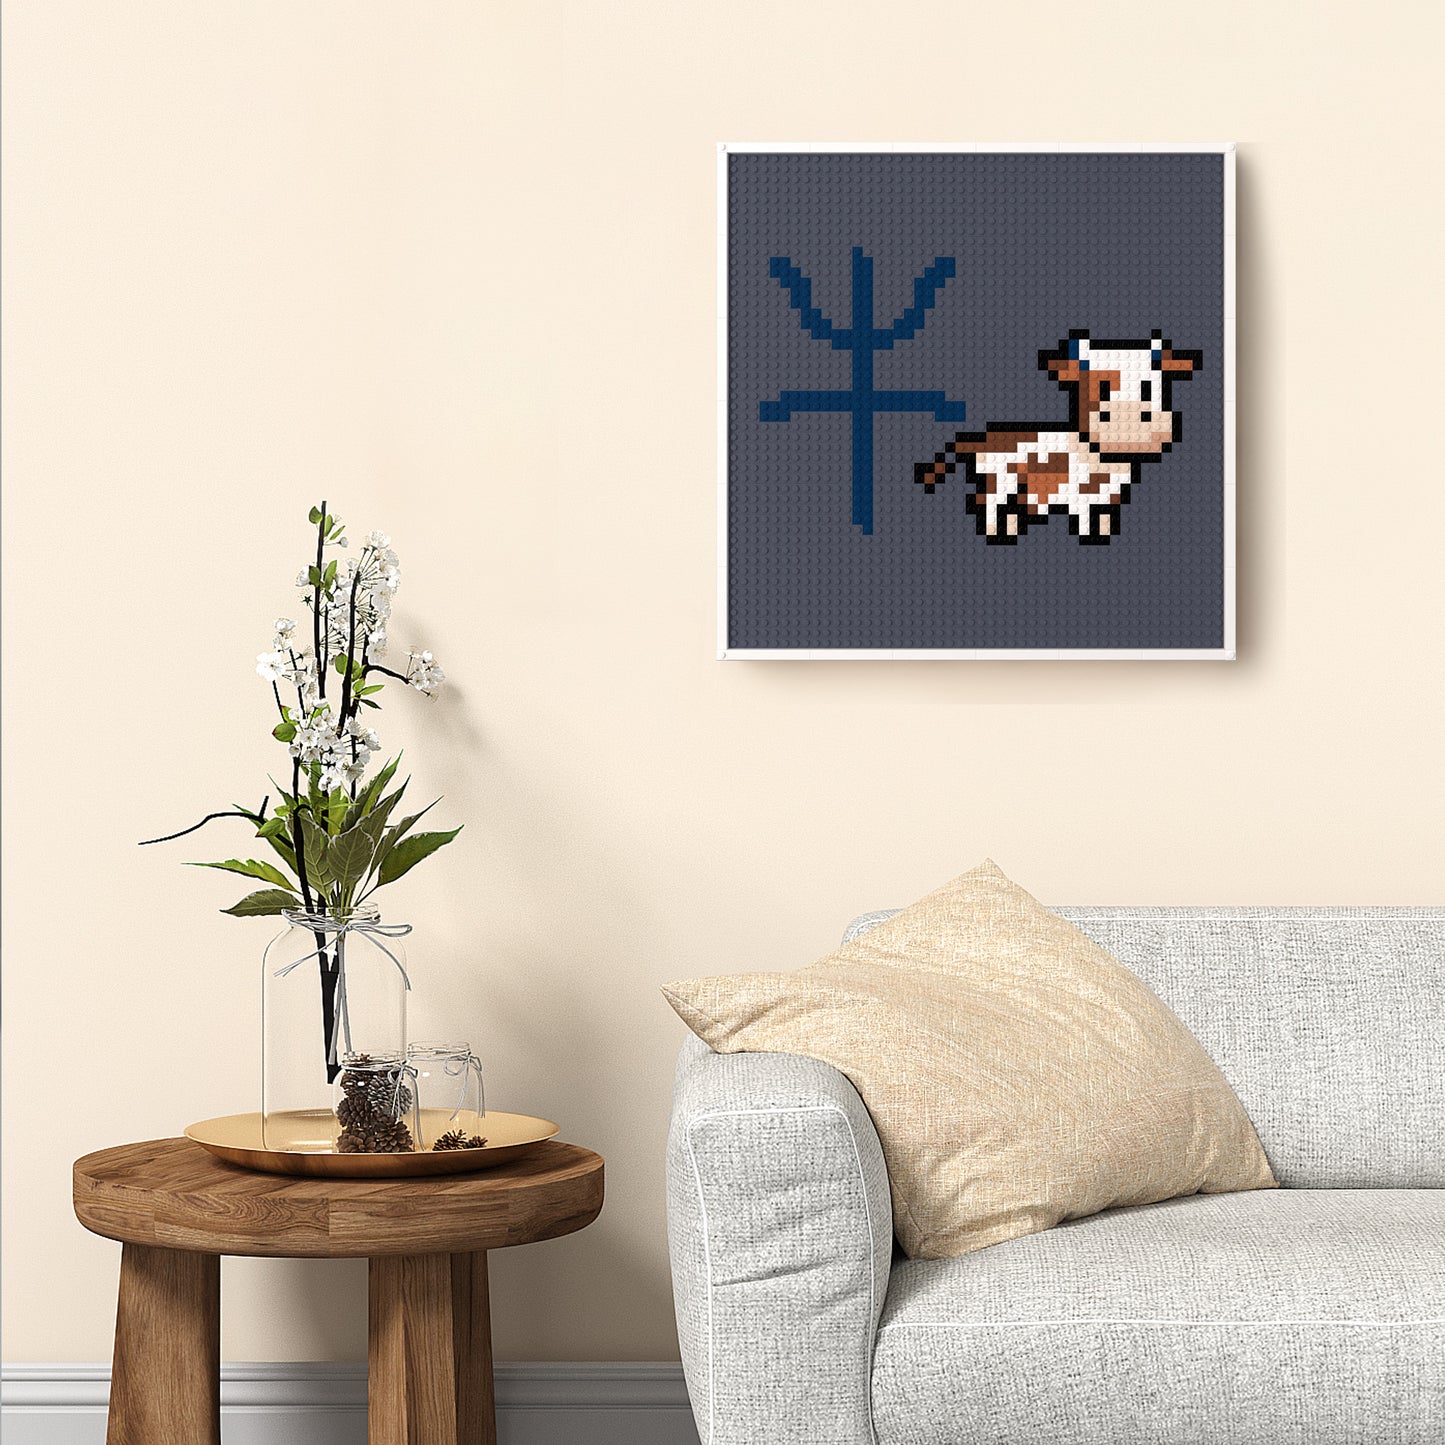 48*48 Dot Handmade Building Brick Pixel Art Chinese Zodiac Ox Customized Chinese Traditional Culture Artwork Best Gift for Friends of Ox